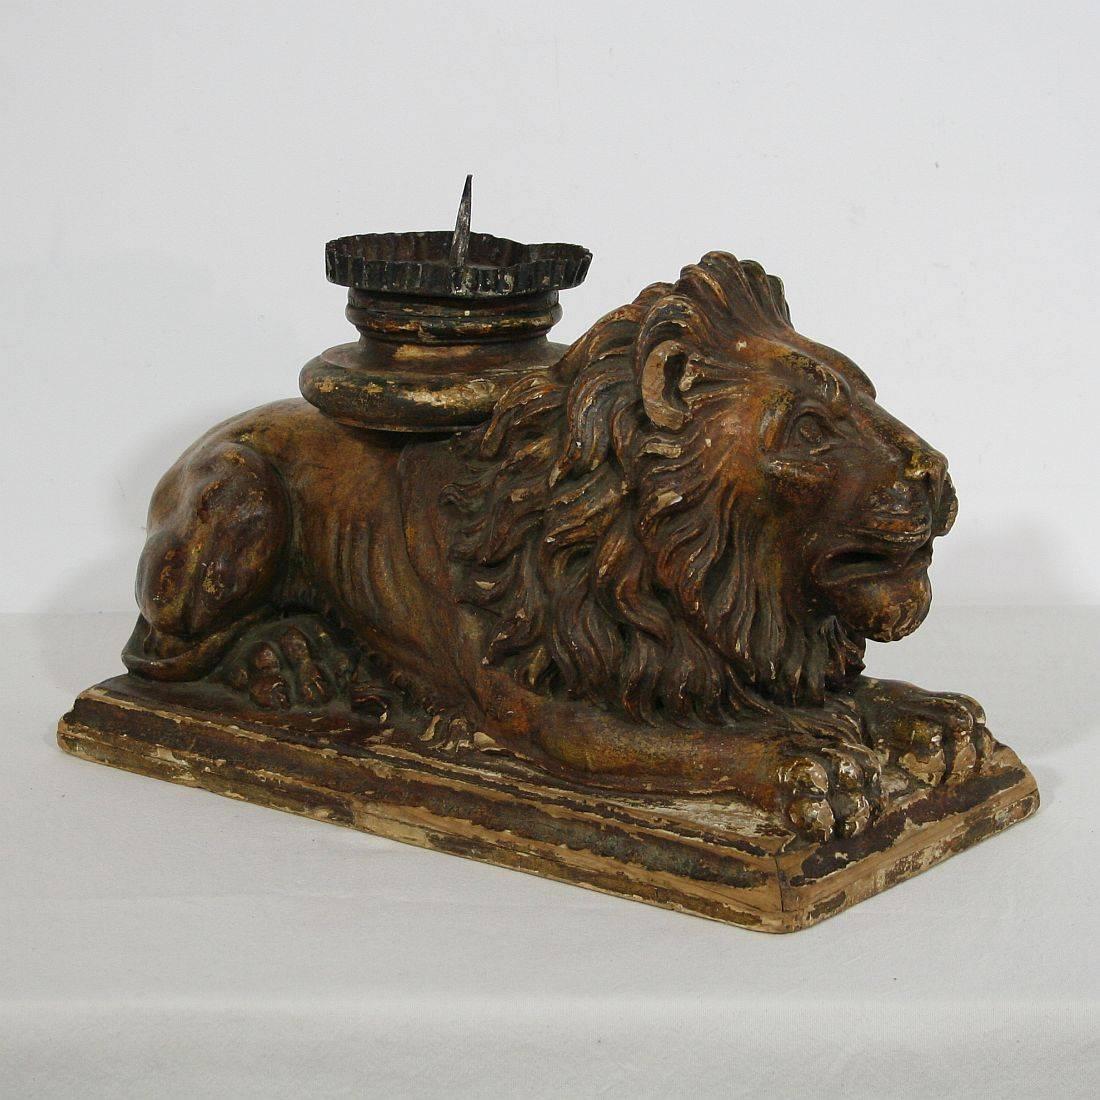 Unique and beautiful item. Carved wooden lion with candle-holder. Original period piece,
Italy, circa 1750.
Weathered. More pictures are available on request.